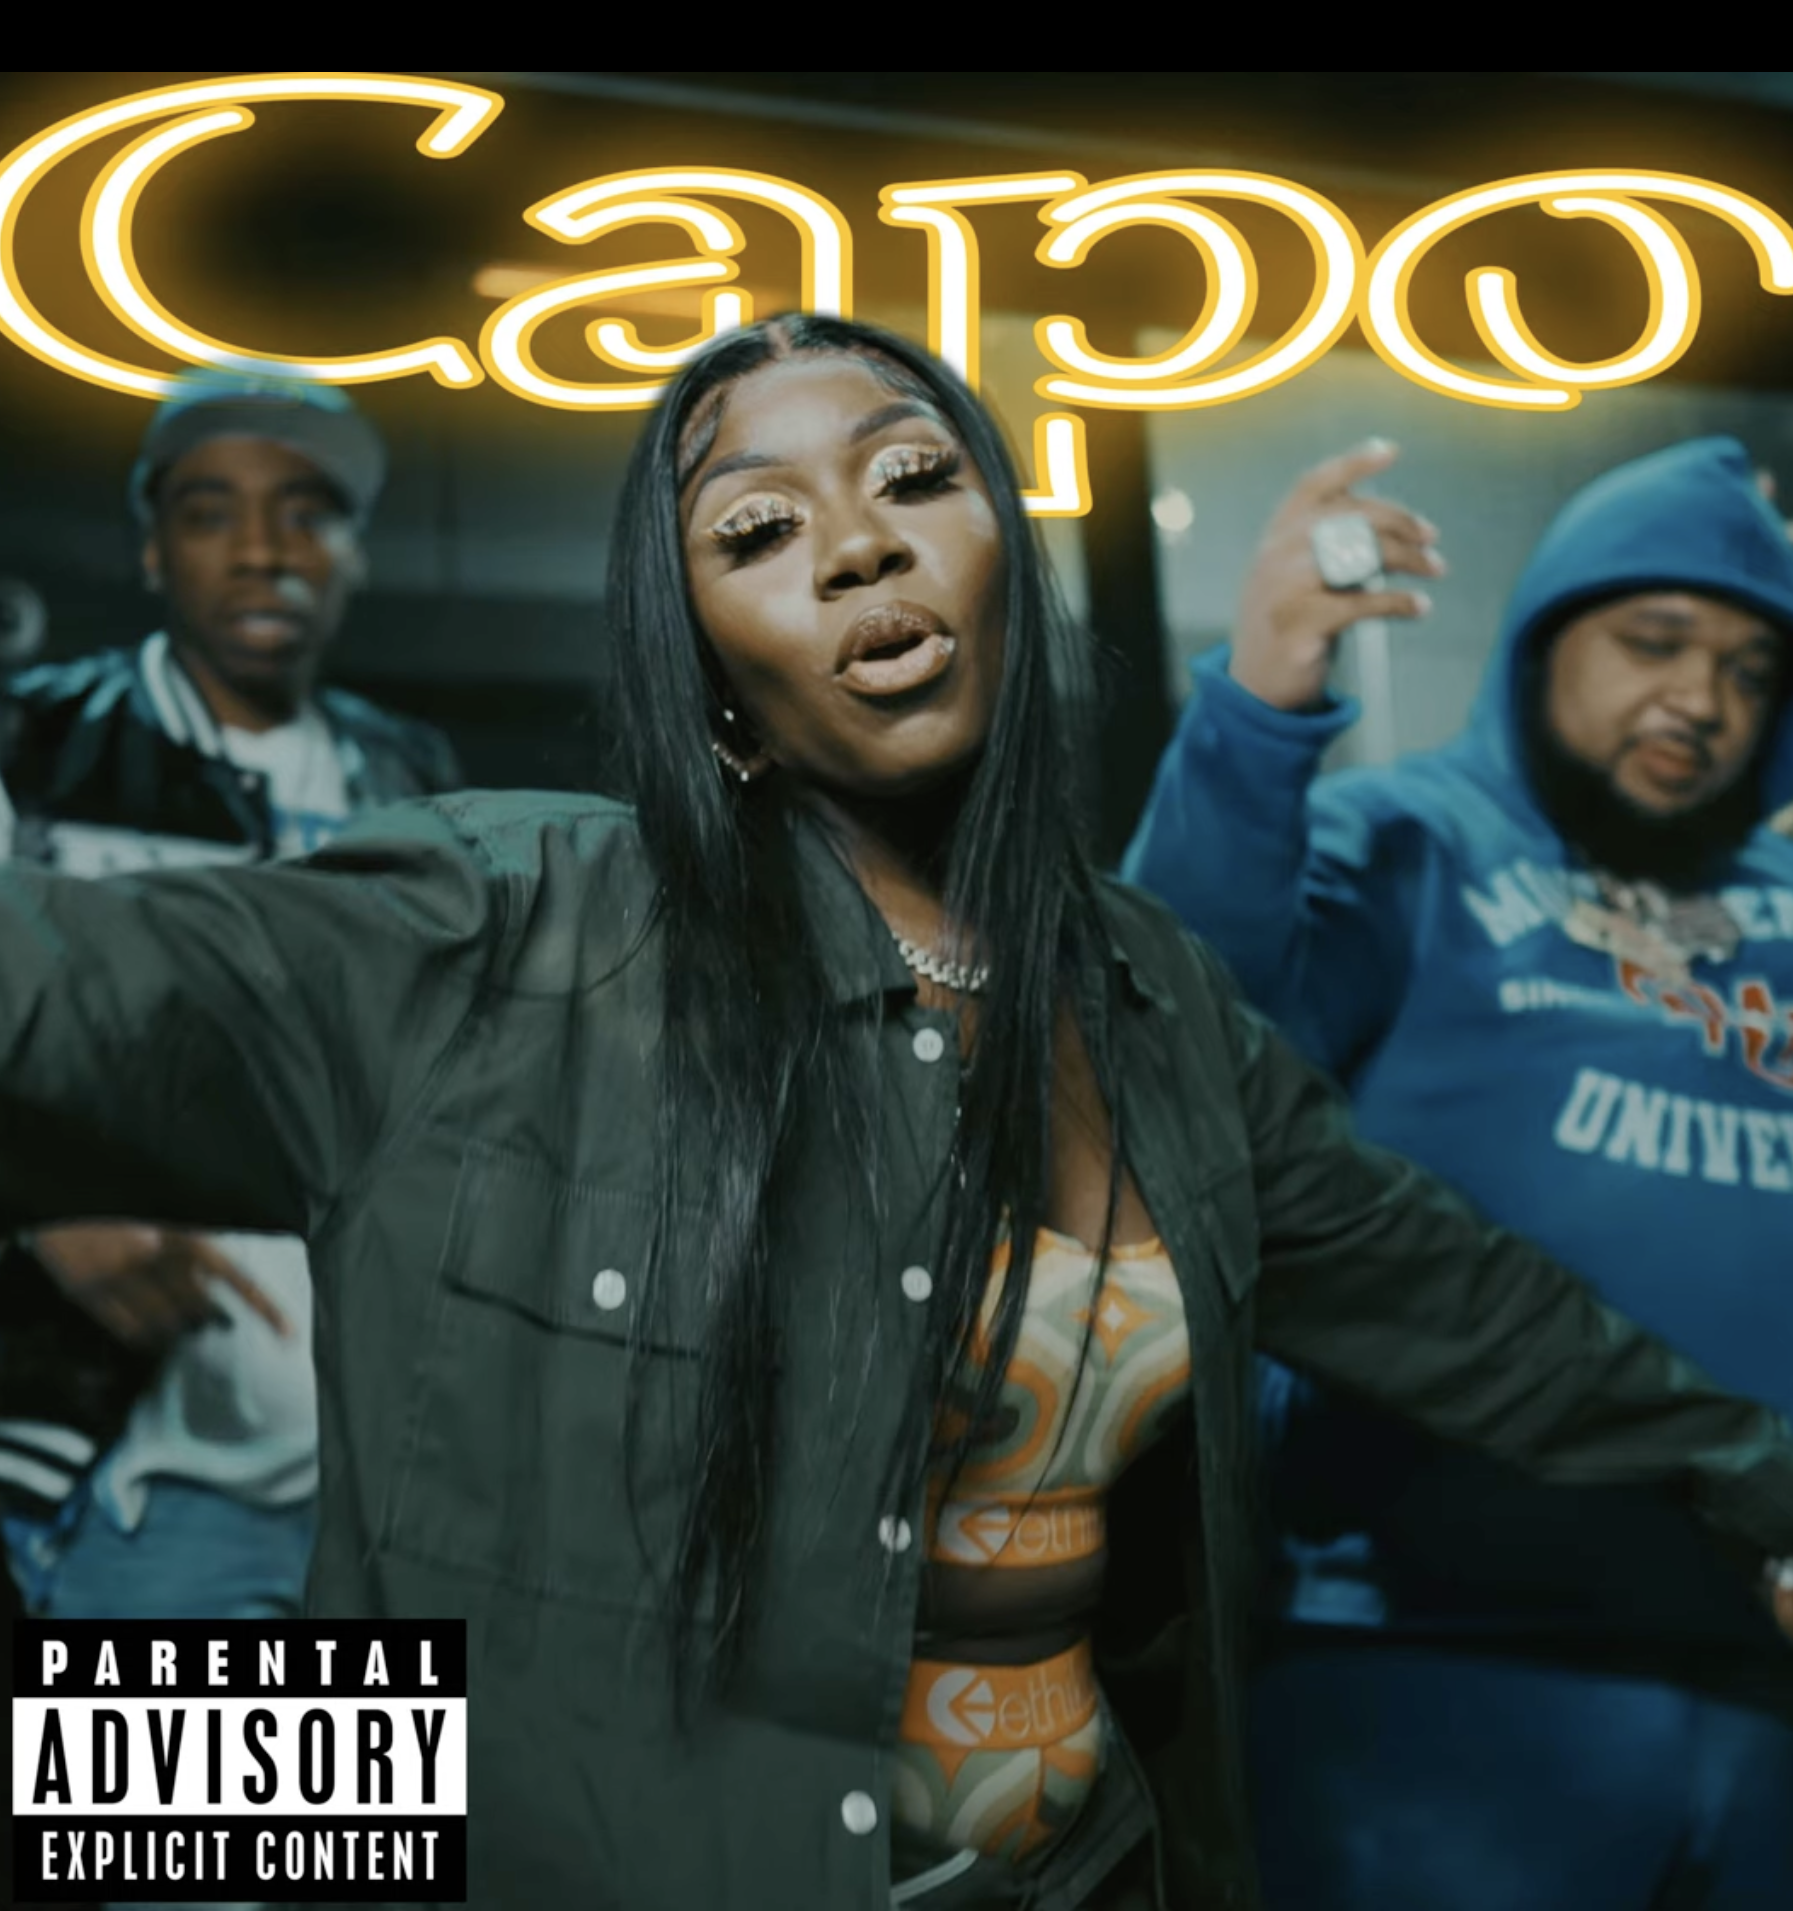 Cakeswagg Makes a Bold Statement with New Release 'Capo' Featuring Dyce Payso miixtapechiick